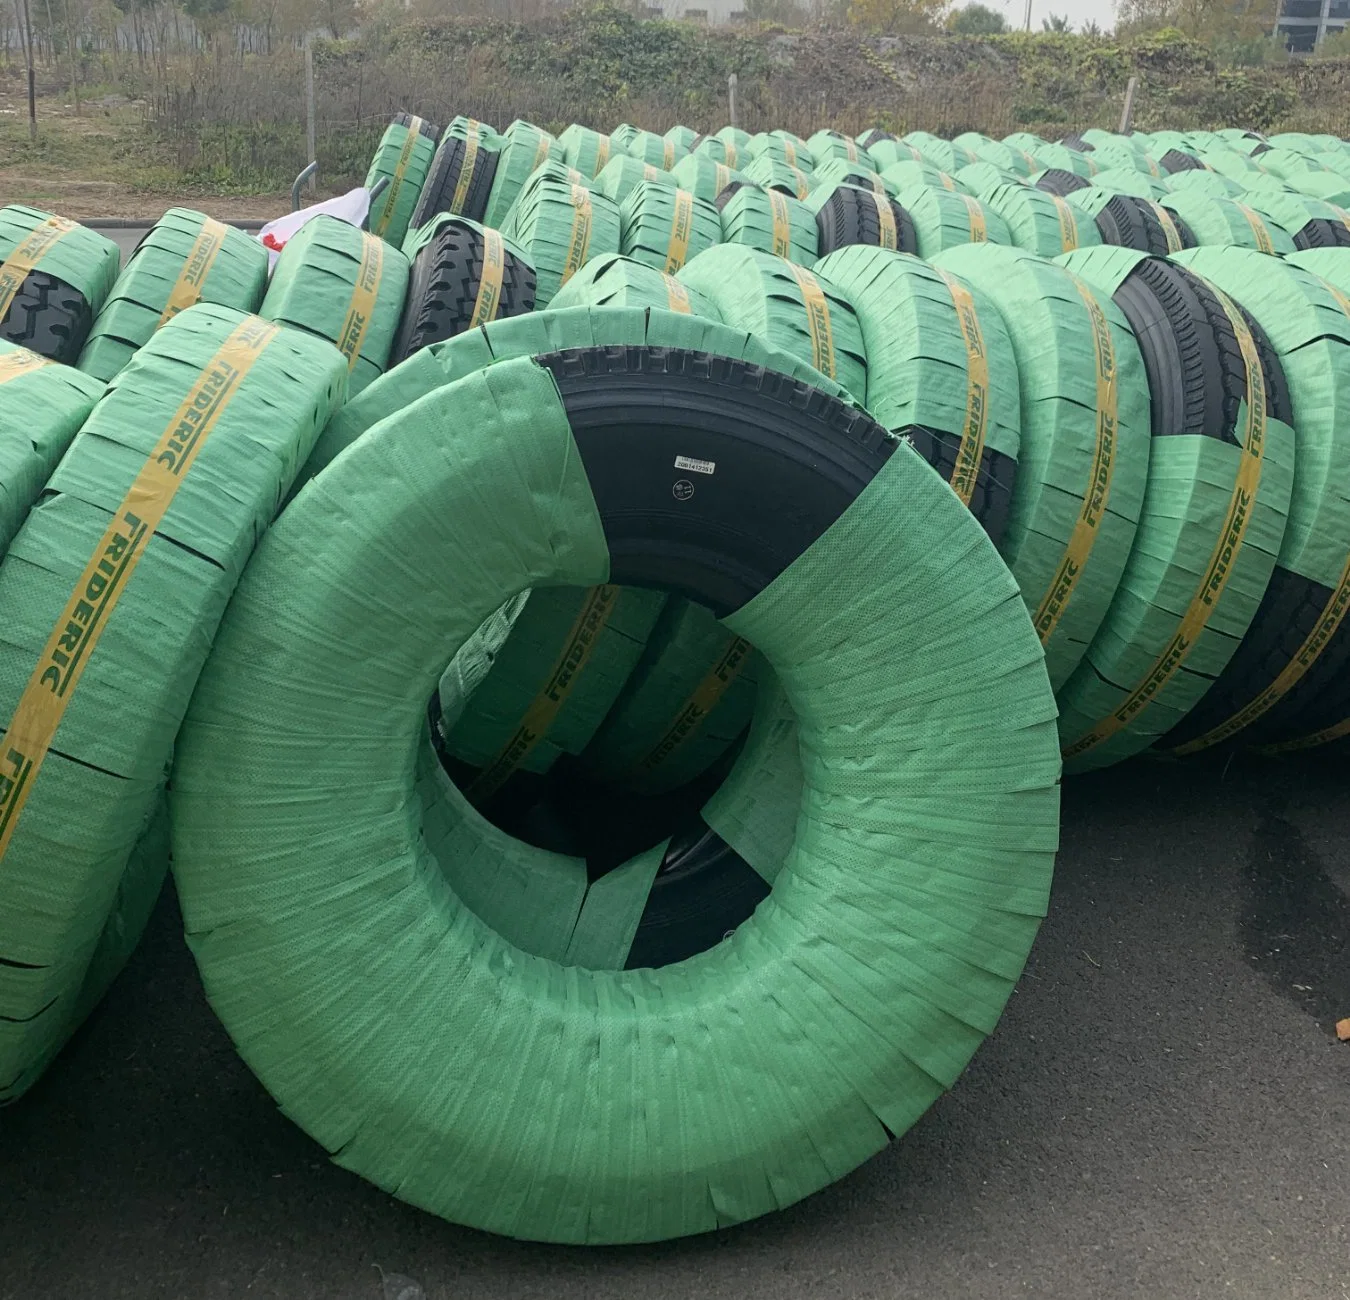 All Steel Radial Truck Tires Bus Tires TBR Tires Radial Tyre (11R22.5 12R22.5, 315/80R22.5 385/65R22.5)